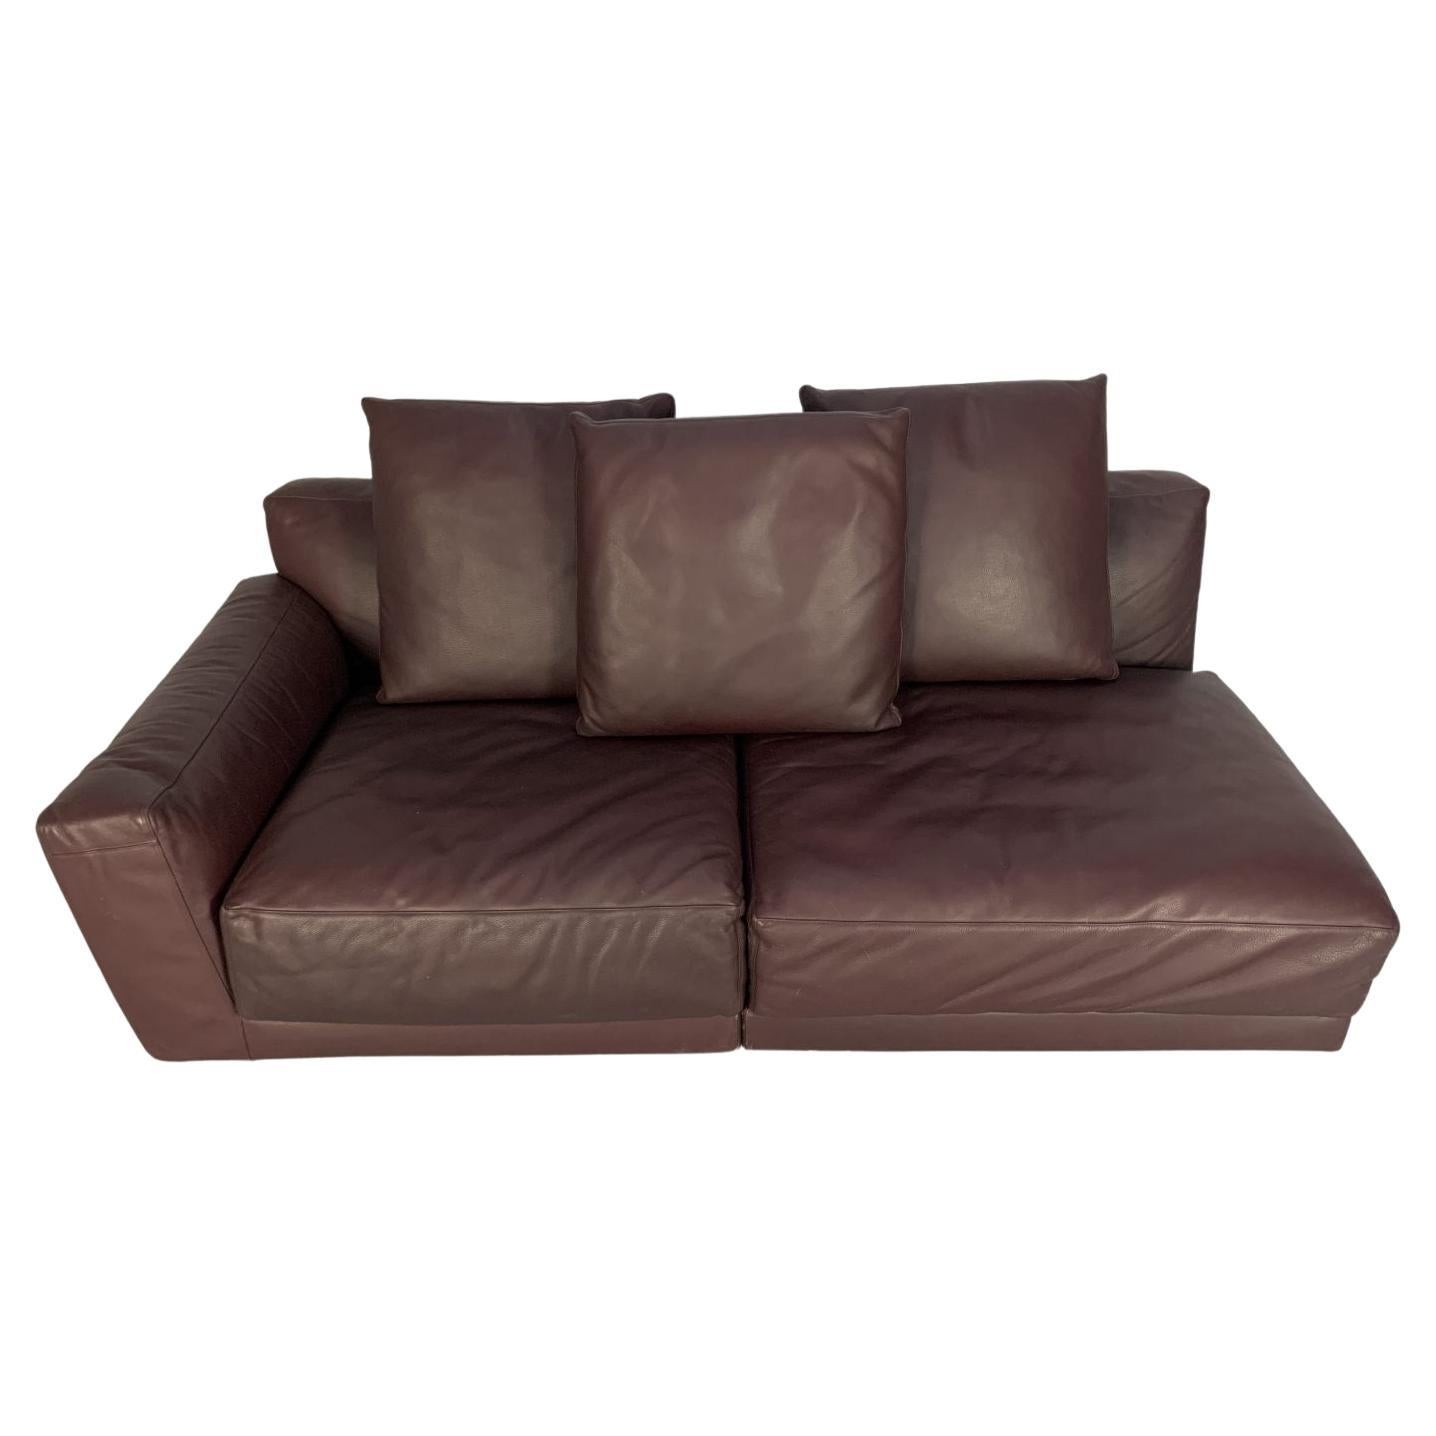 B&B Italia “Luis” 3-Seat Chaise-End Sofa in Oxblood Deep Red “Alfa” Leather For Sale